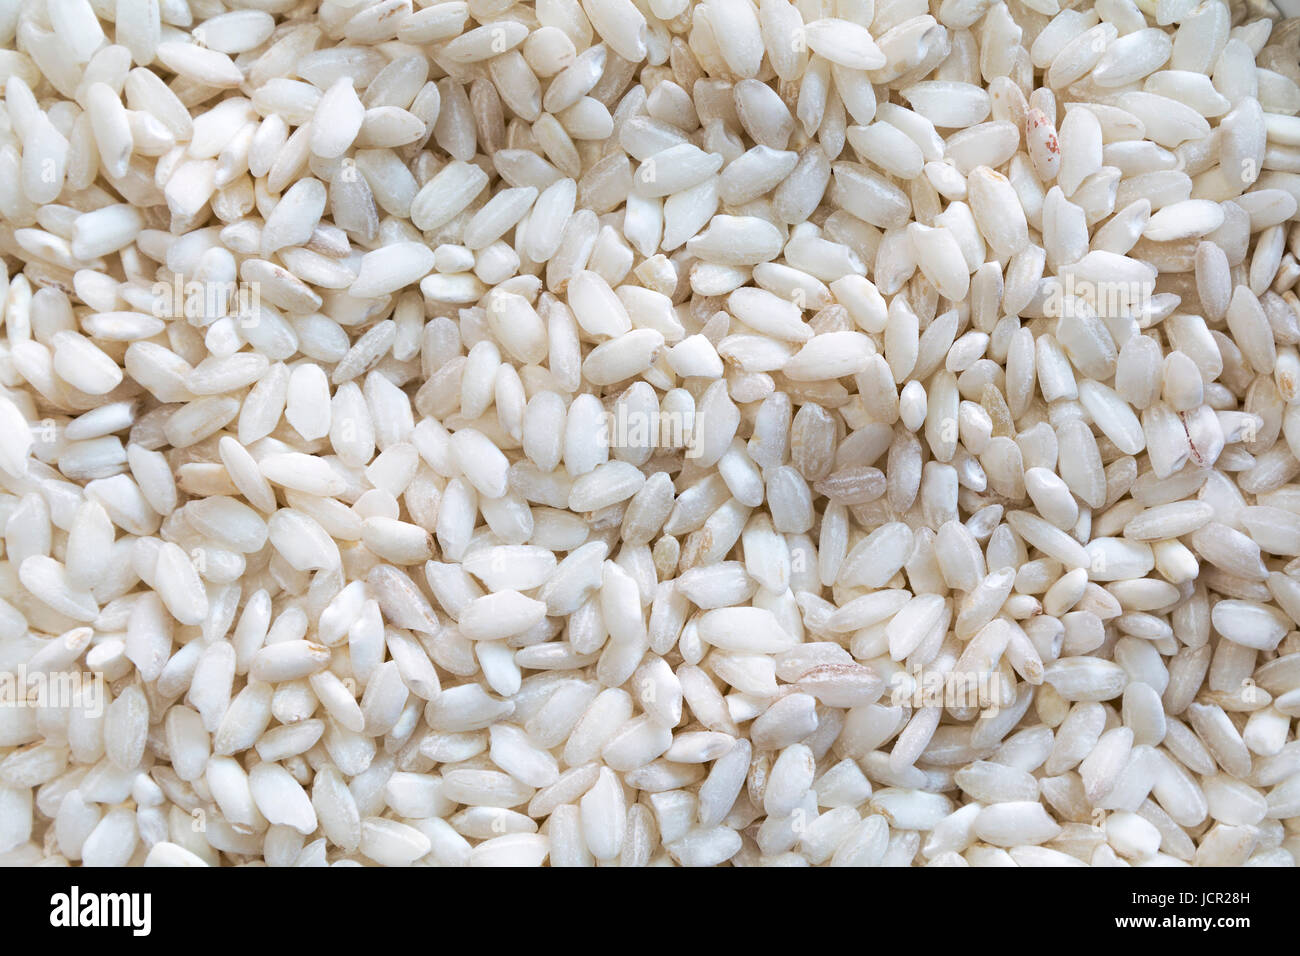 Arborio risotto rice raw close up from an overhead perspective Stock ...